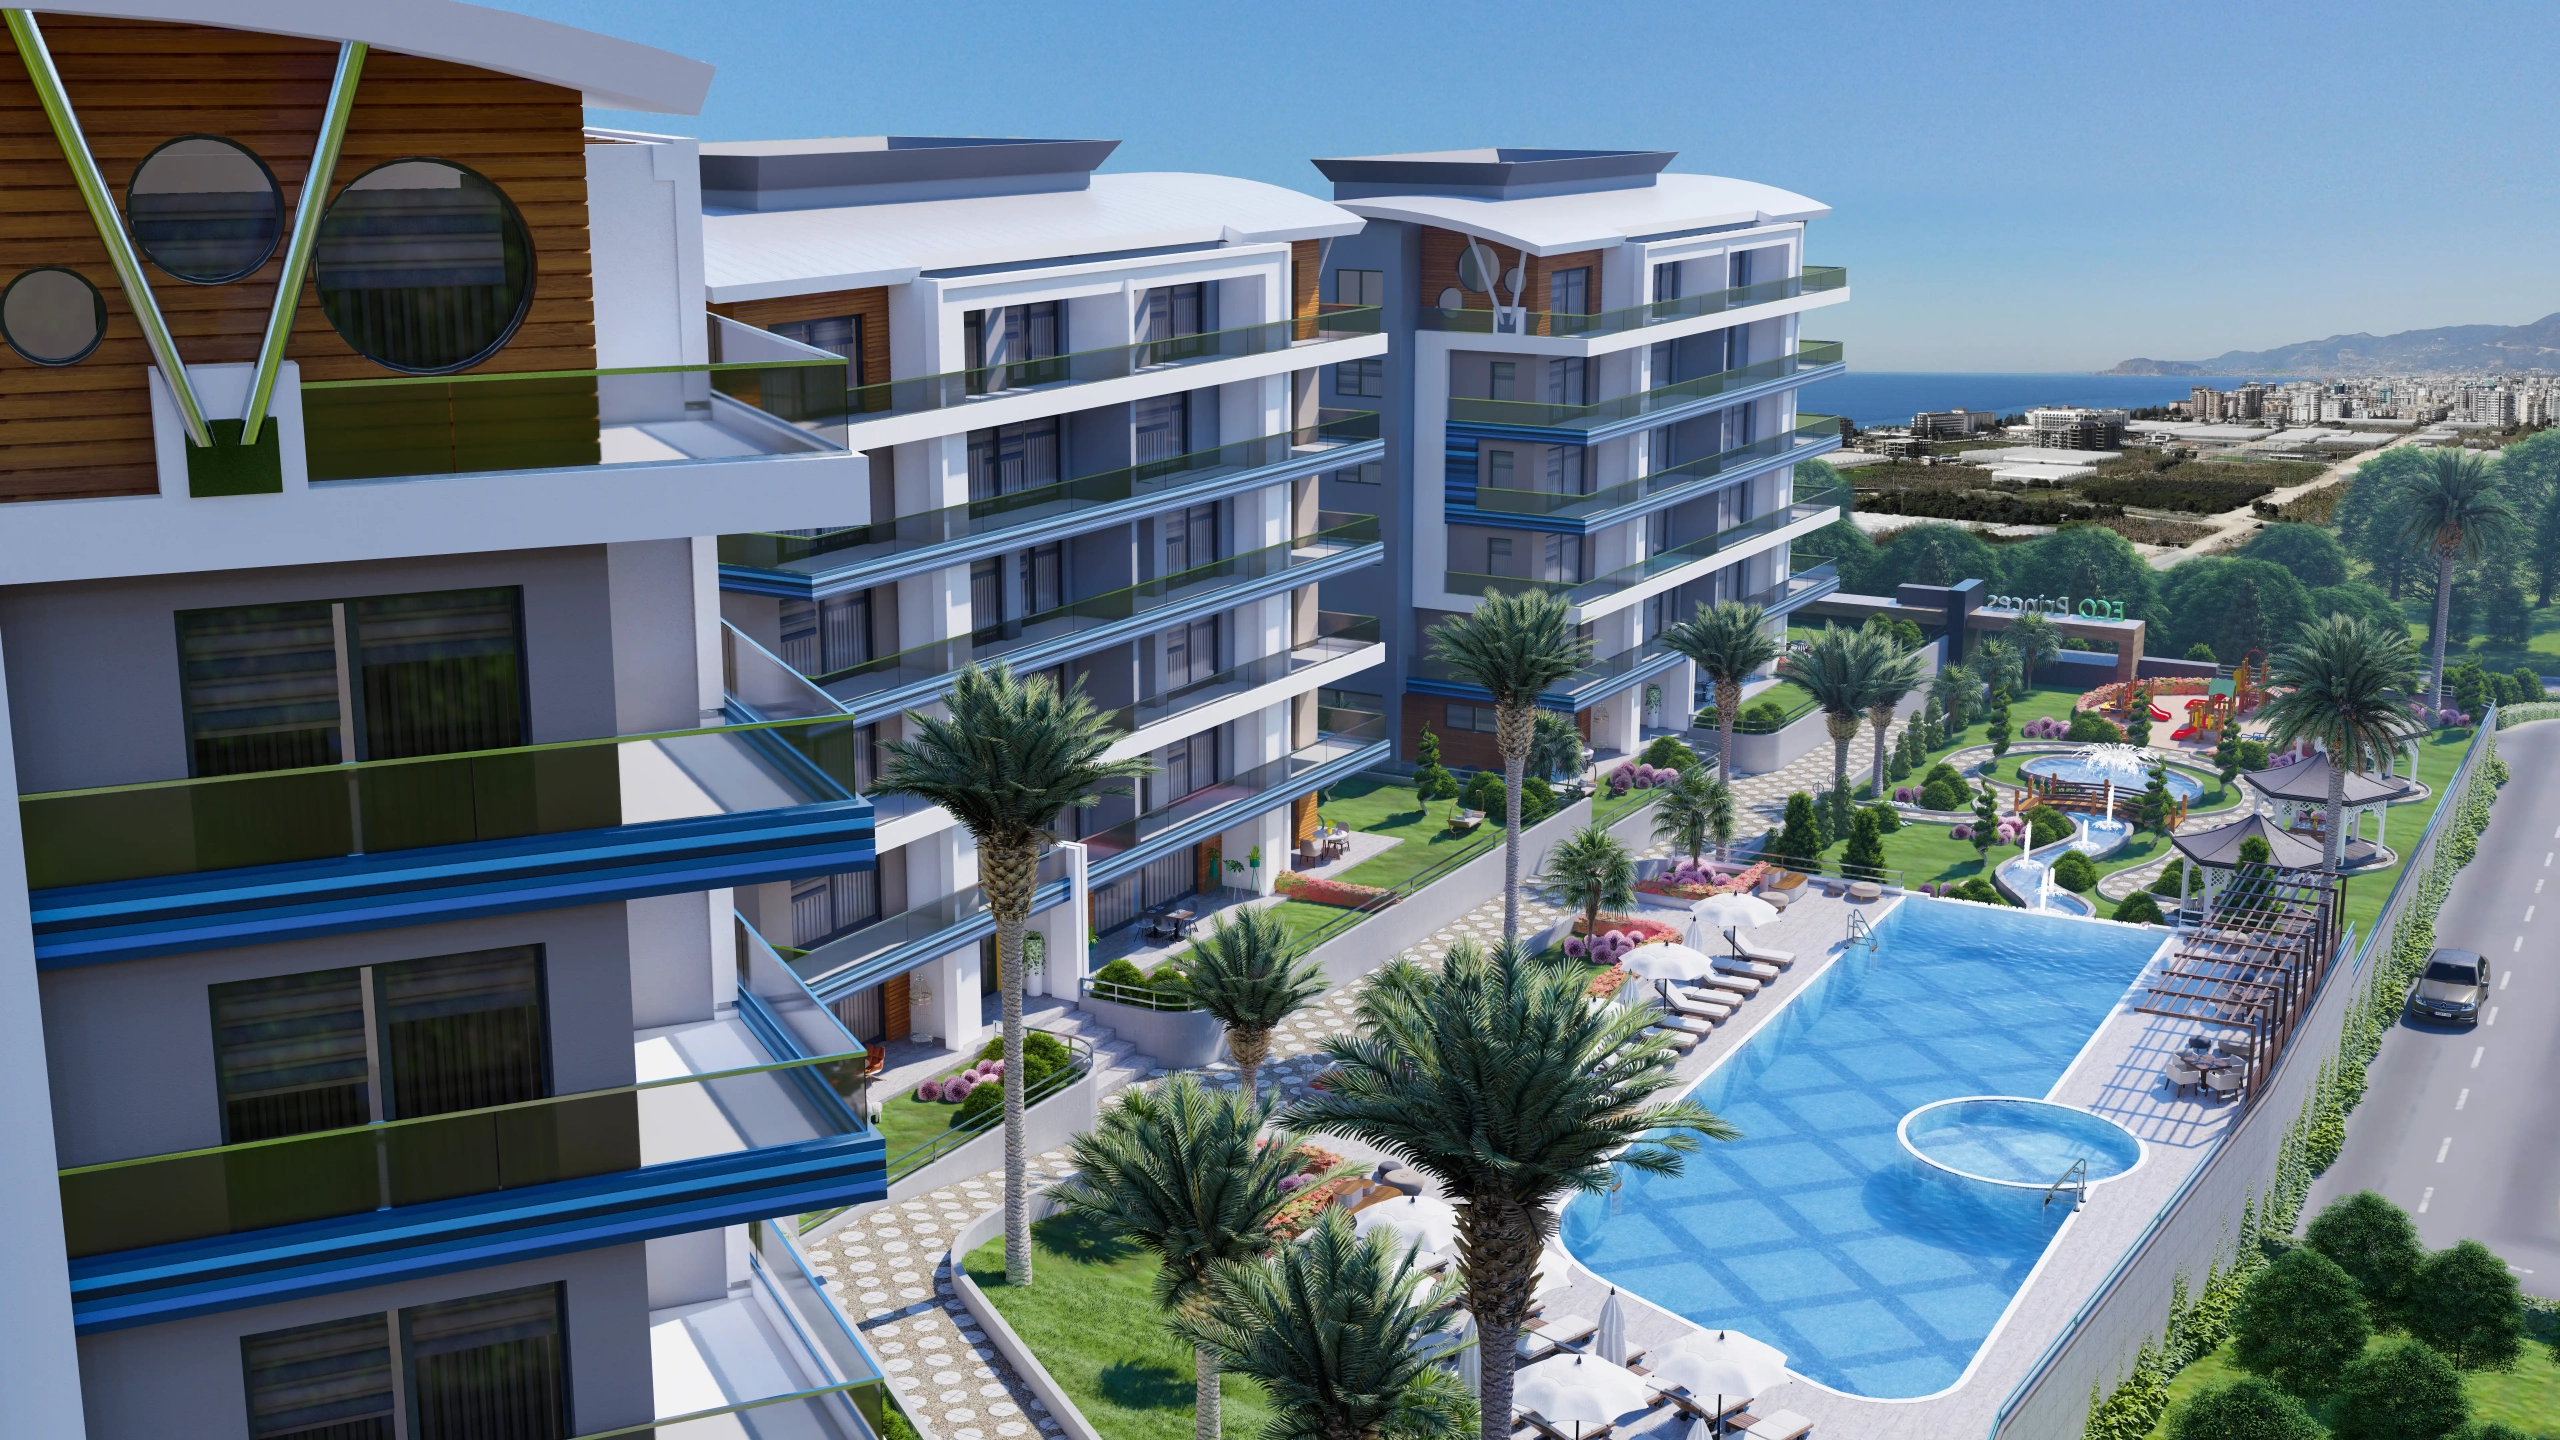 Modern Apartments For Sale in Alanya